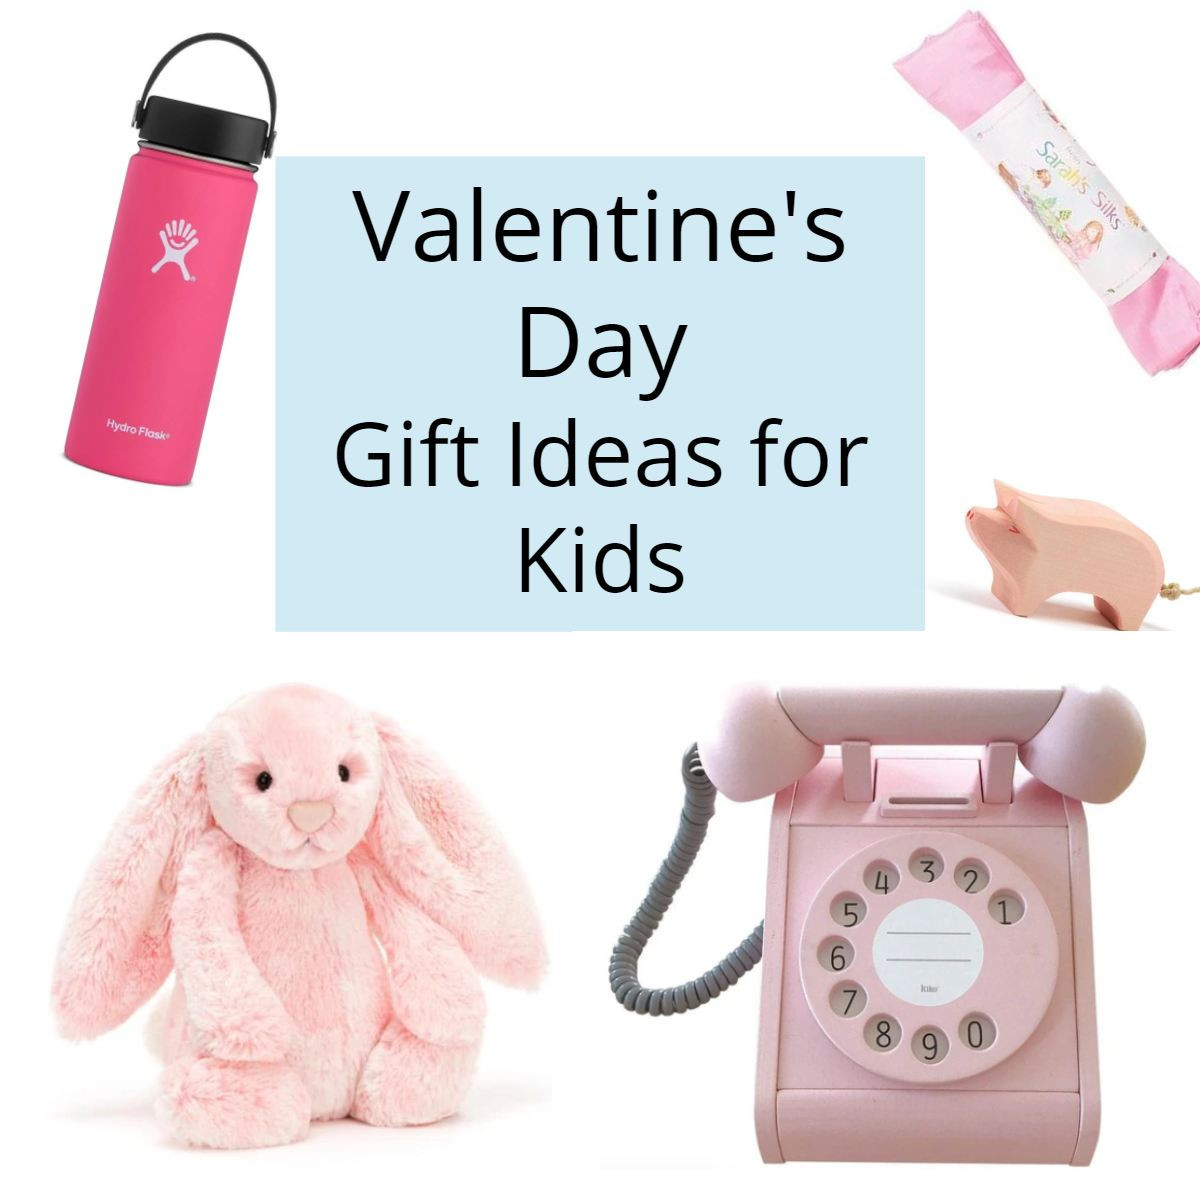 Valentines Day 2020 Gift Ideas
 Valentine s Day Gift Ideas for Kids 2020 The Modern